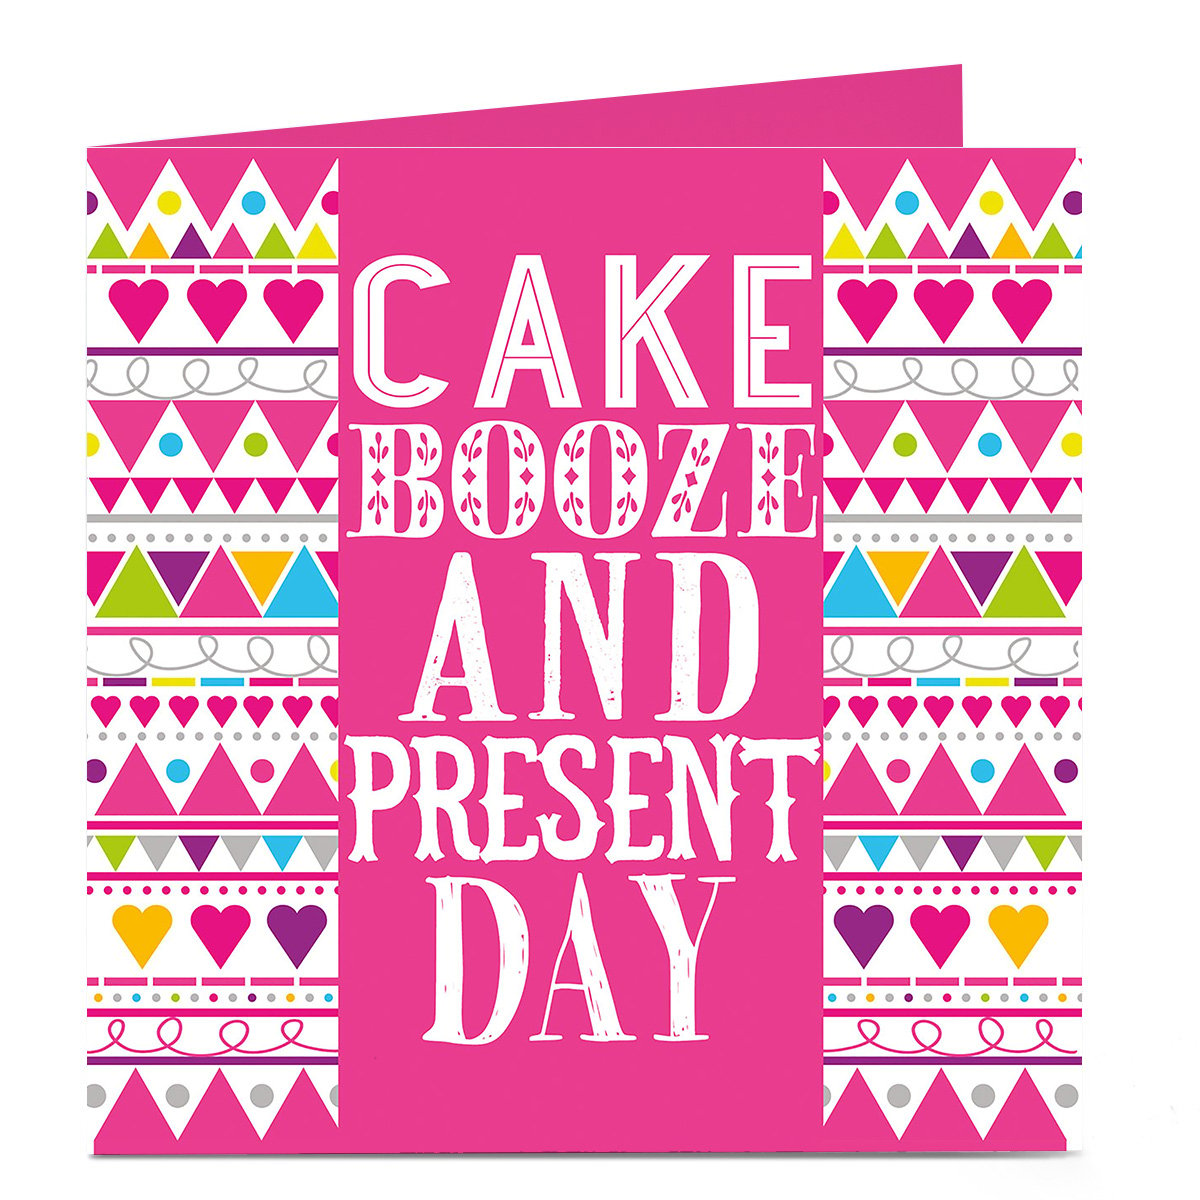 Personalised Bright Ideas Card - Cake Booze And Present Day